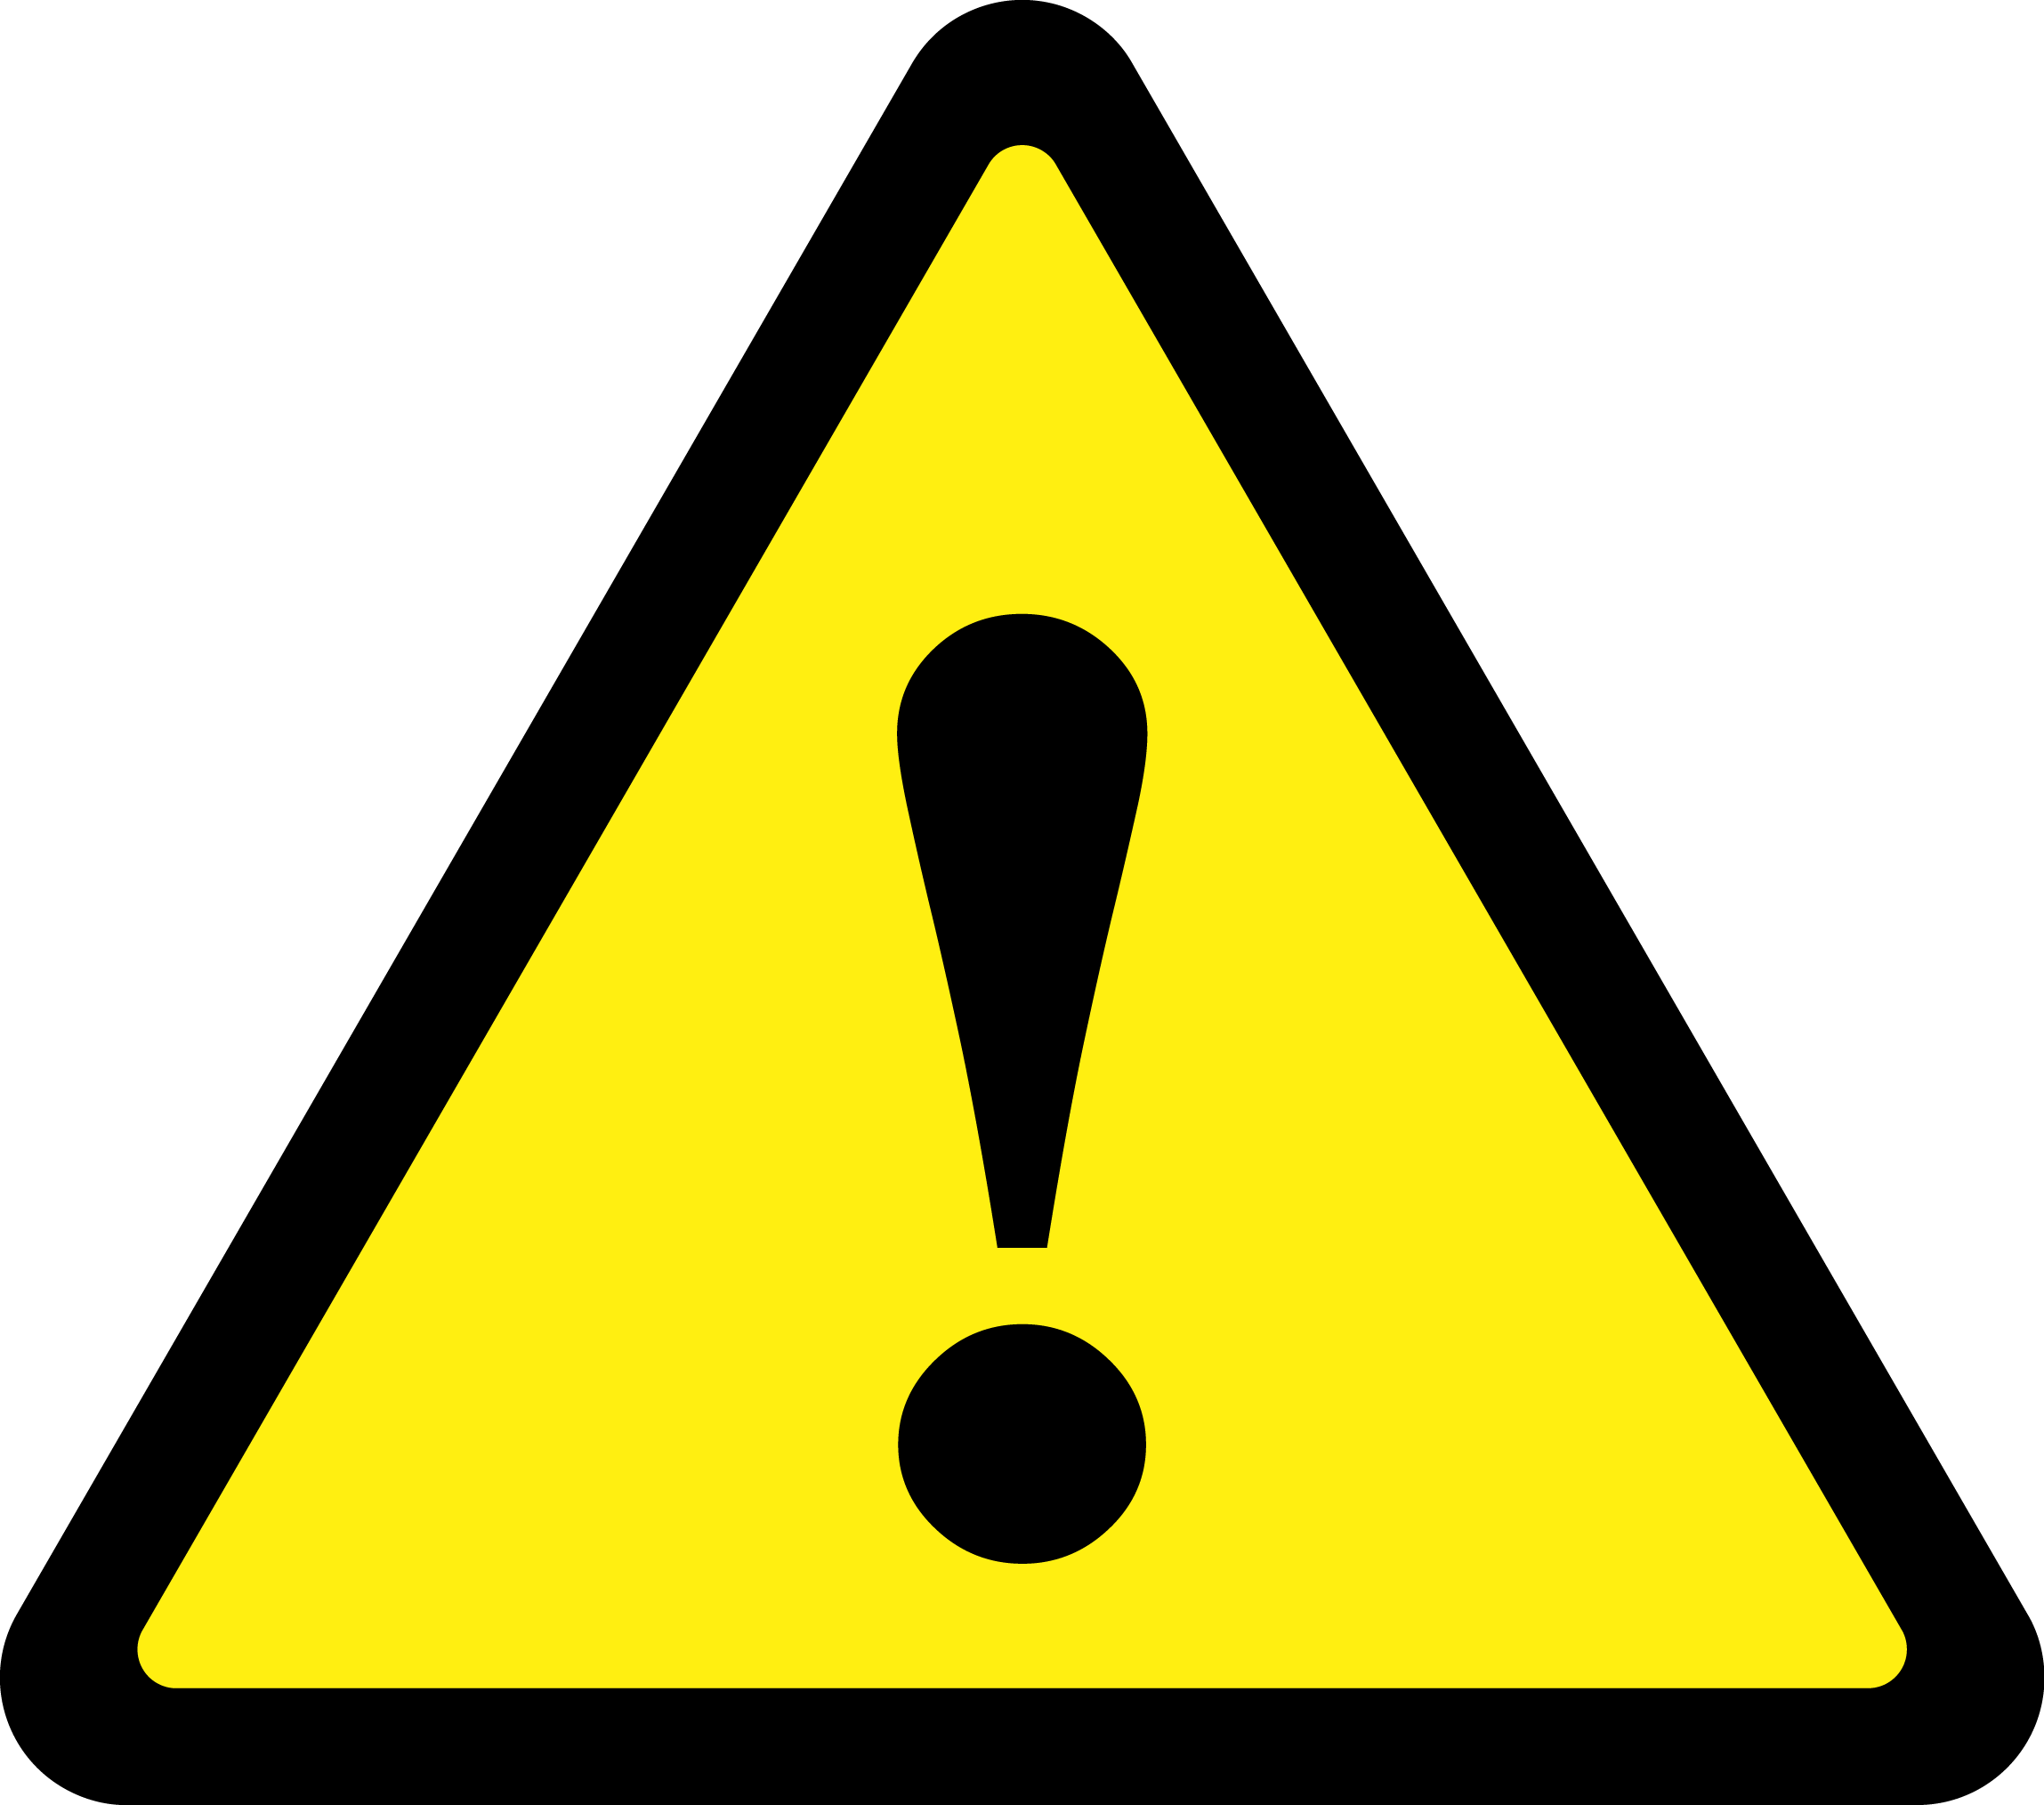 List 105+ Pictures Images Of Caution Signs Latest